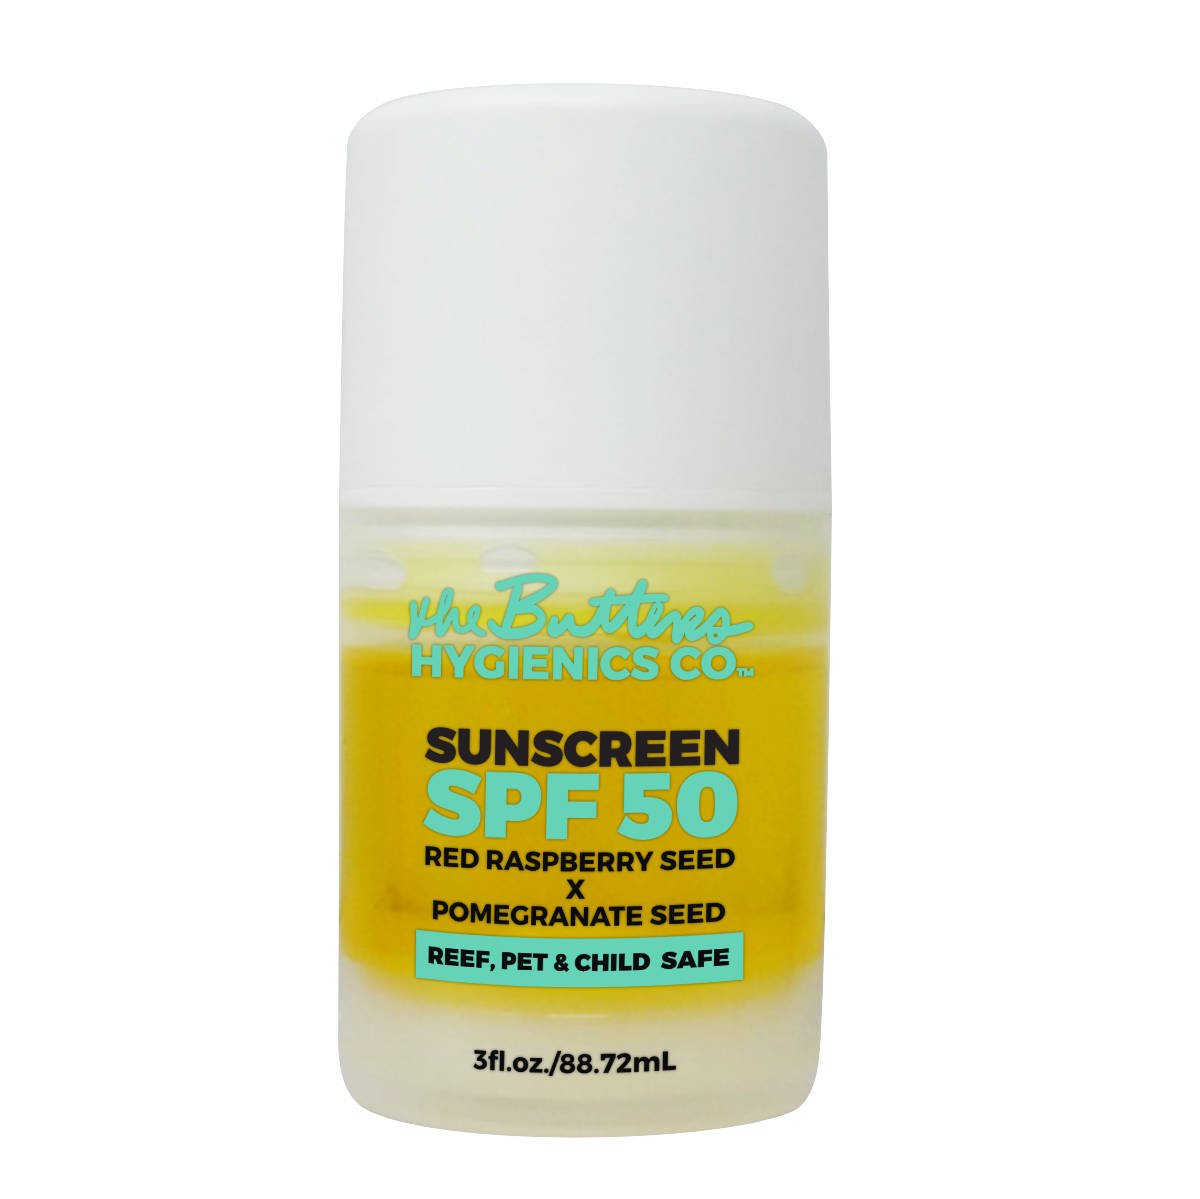 SPF 50 Sunscreen - Red Raspberry X Pomegranate Seed Oil (100% Organic, Plant-based, Safe) — The Butters Hygienics